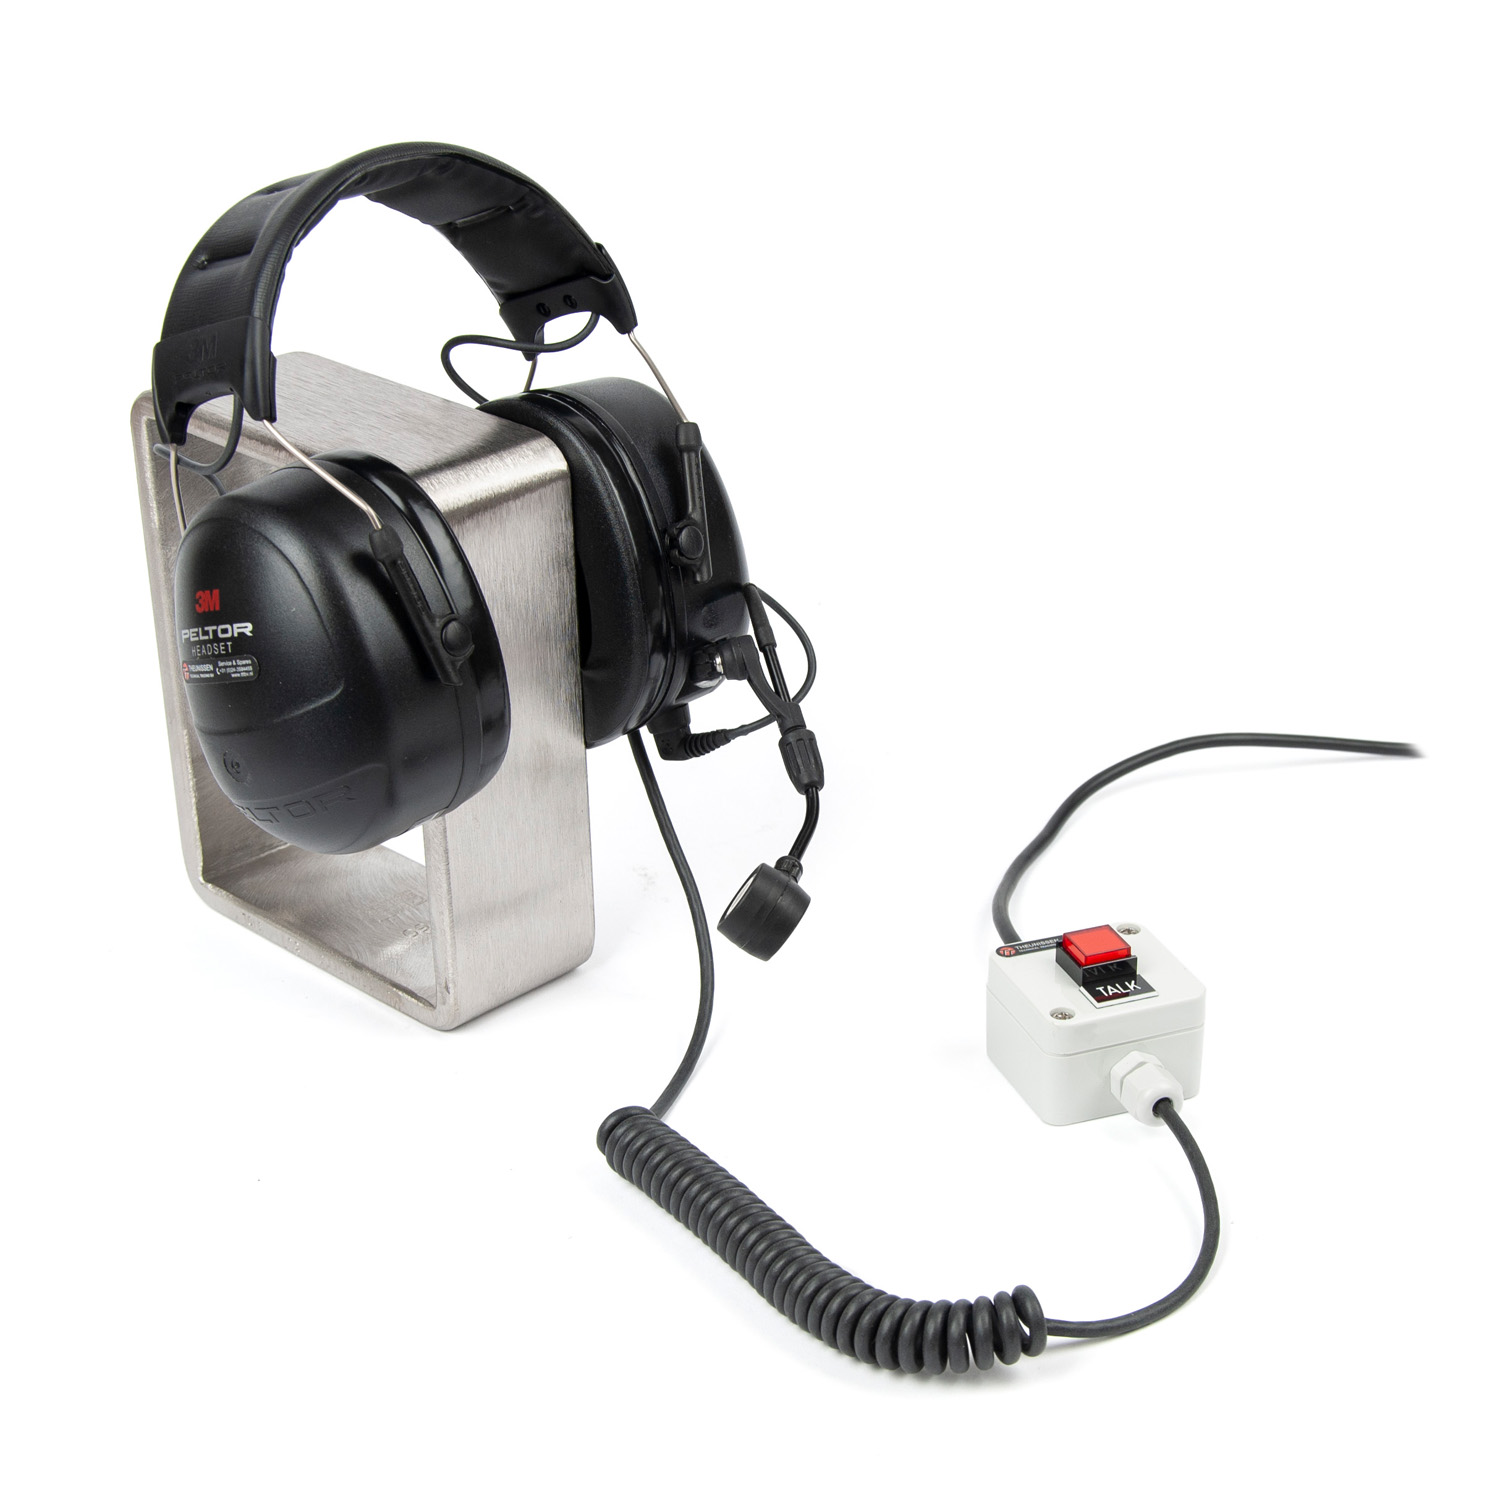 STC-36PEL STC Headset for VMP530 with 10 meter cable